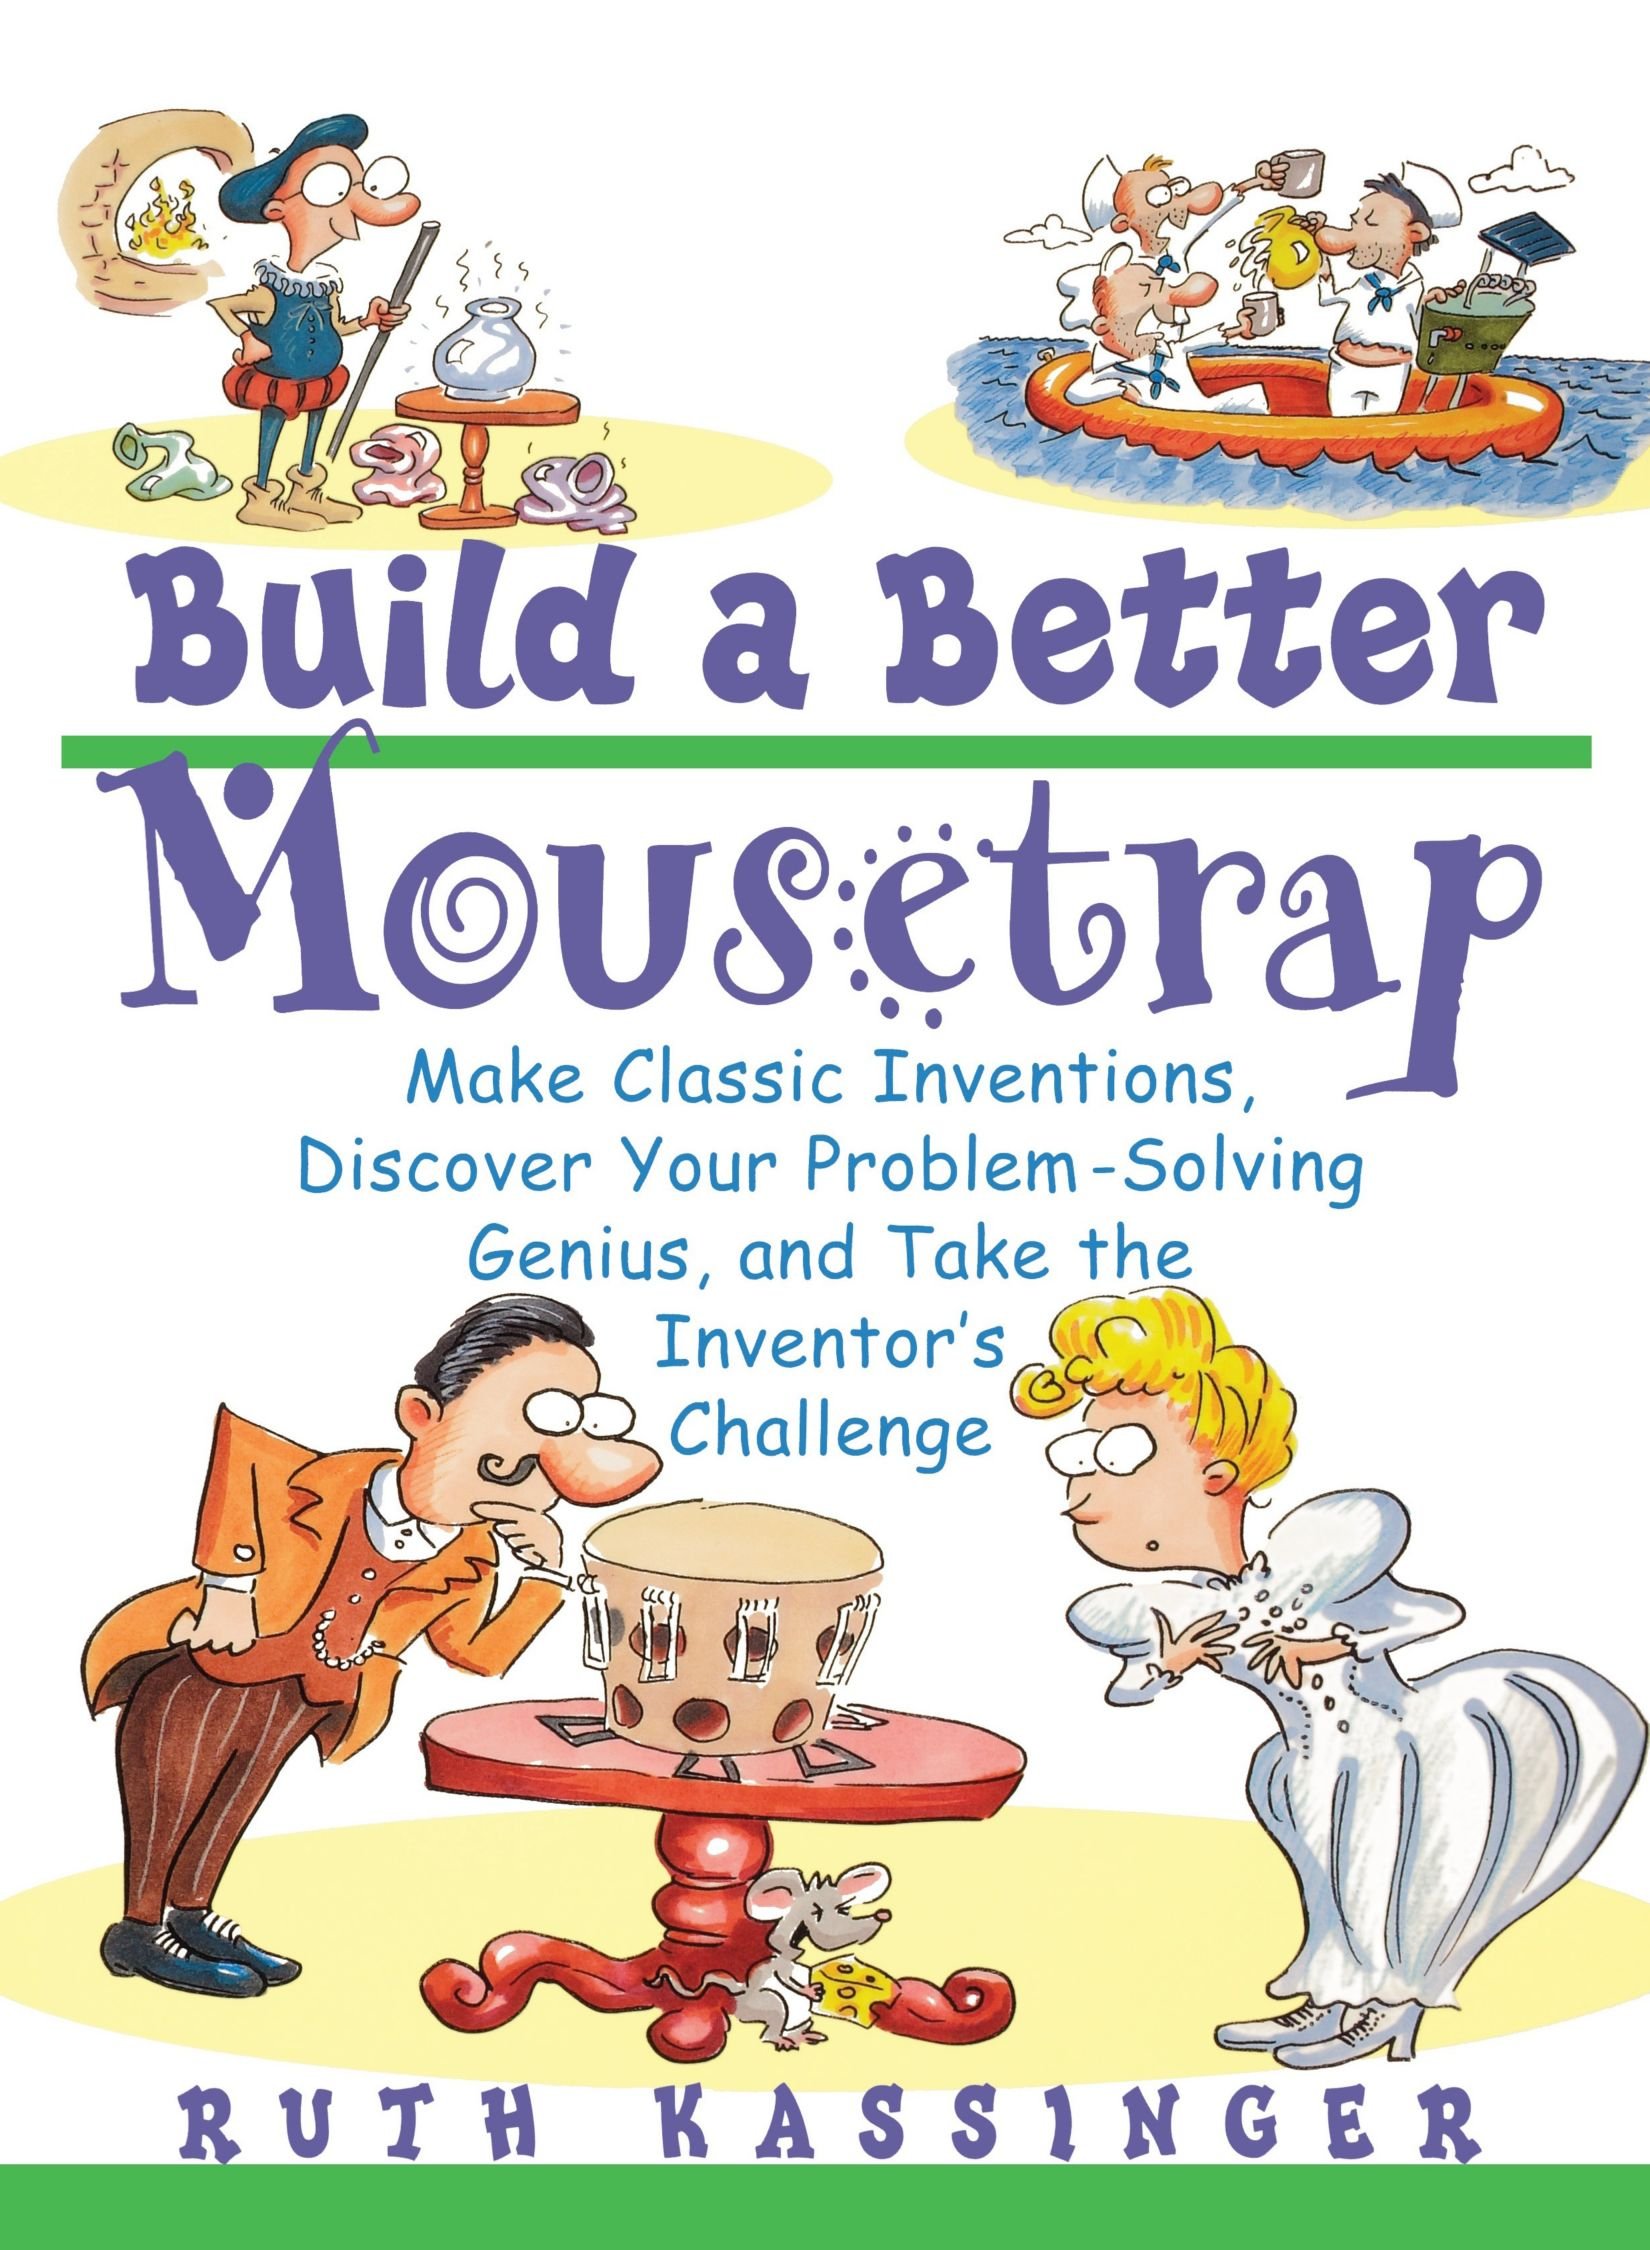 https://www.rif.org/sites/default/files/images/2022/06/14/Book_Covers/bettermousetrap.jpeg